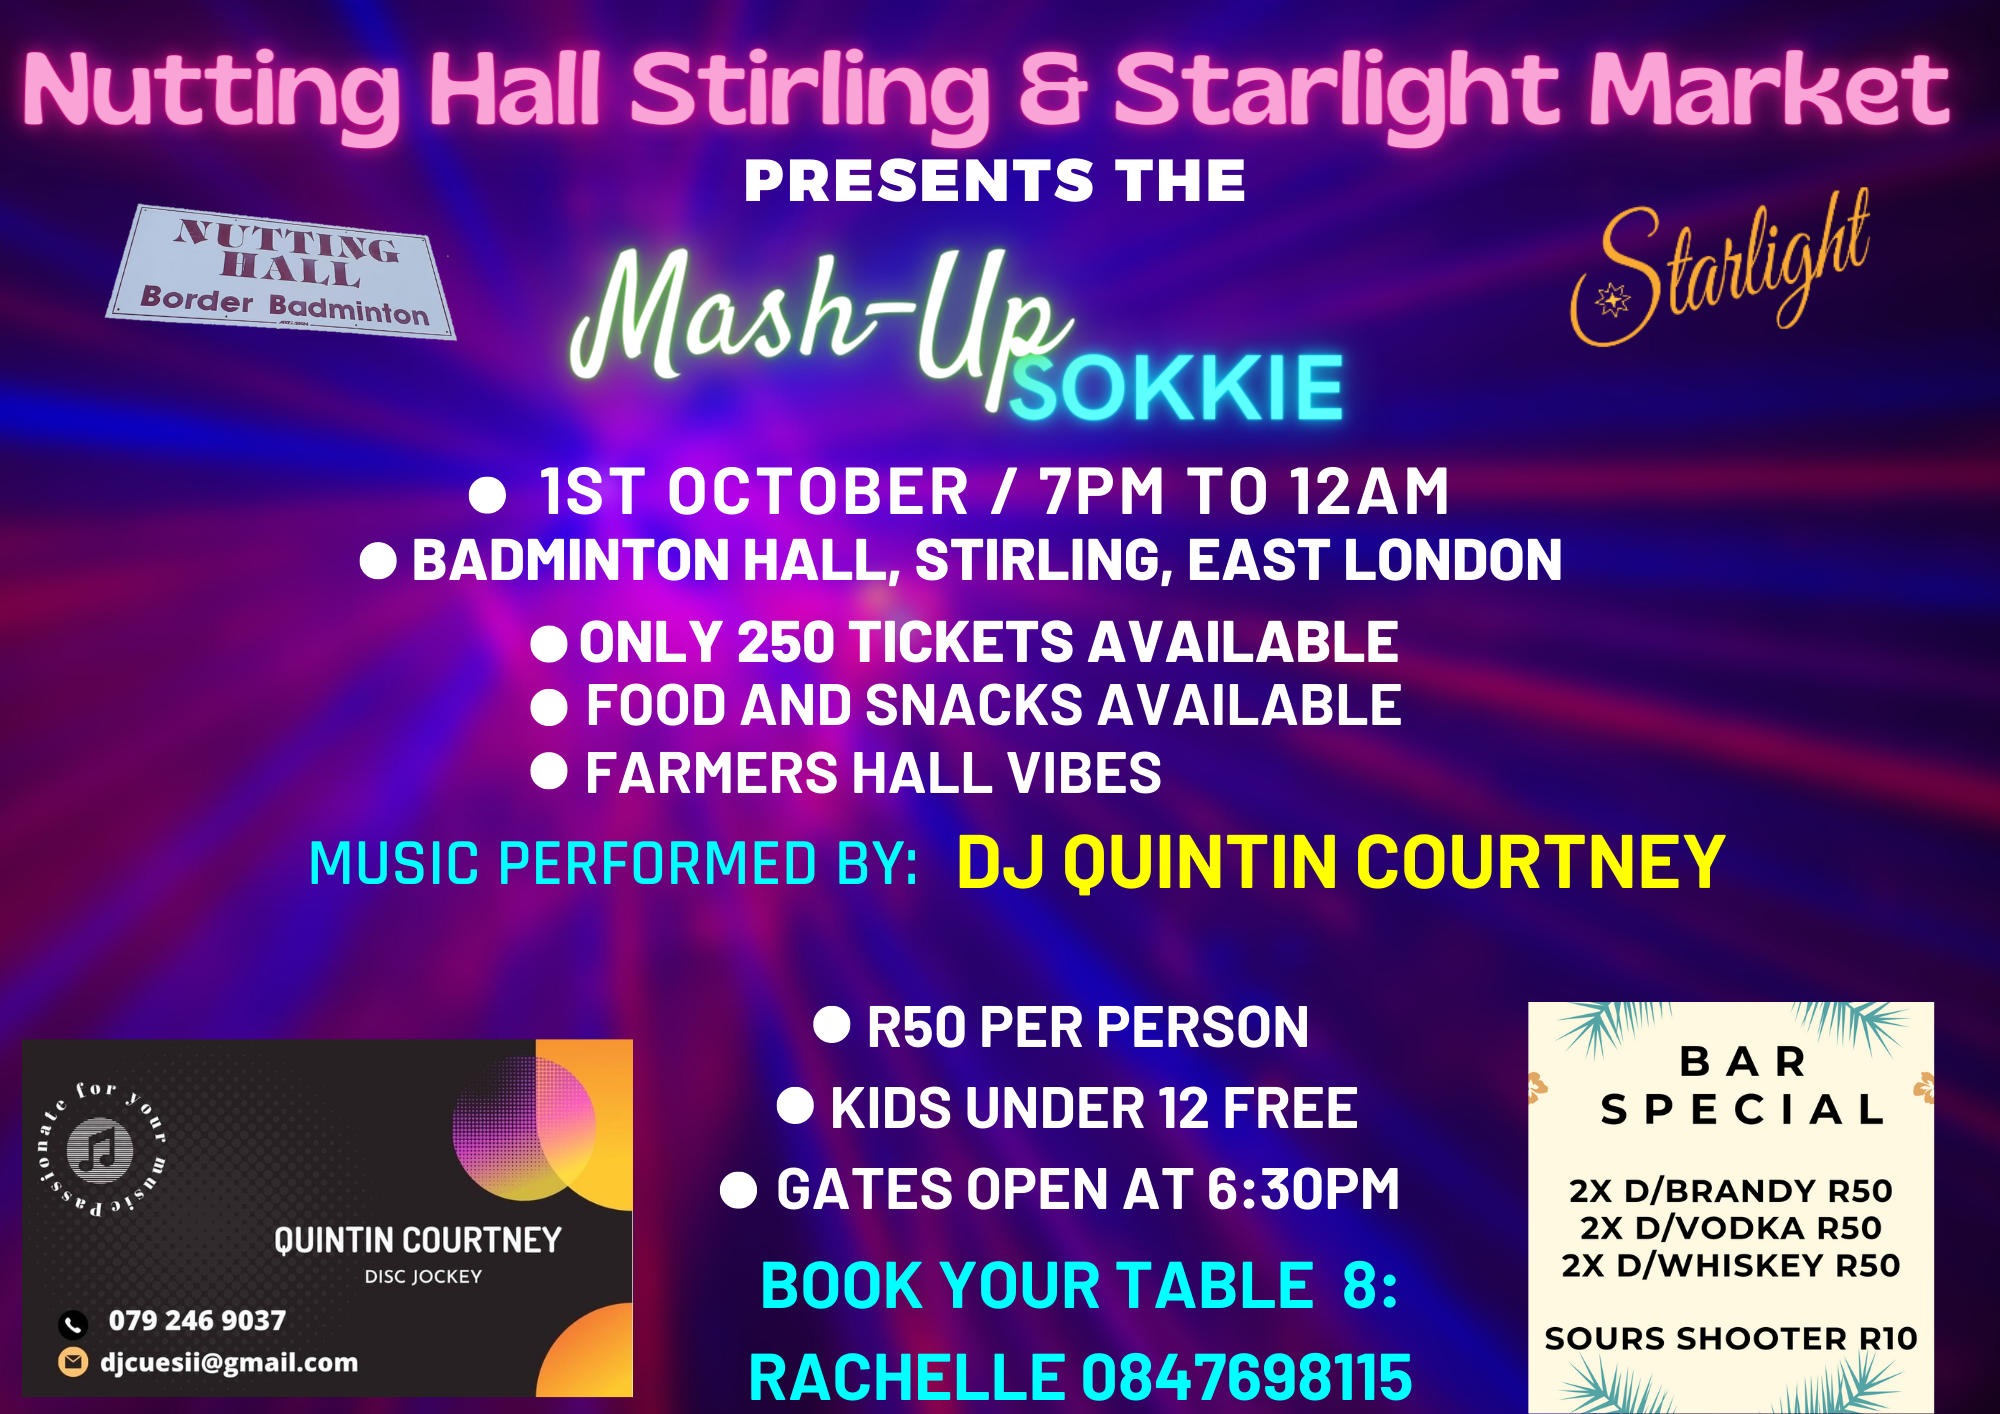 Nutting Hall Stirling & Starlight Market

PRESENTS THE

» Sm
Tex 1/2 3 >

® IST OCTOBER /7PM TO 12AM
© BADMINTON HALL, STIRLING, EAST LONDON

® ONLY 250 TICKETS AVAILABLE
® FOOD AND SNACKS AVAILABLE
® FARMERS HALL VIBES

MUSIC PERFORMED BY: DJ QUINTIN COURTNEY

  

   
   

NUTTY y

NG
HALL, p-
|_Border Badminton

   

® R50 PER PERSON BAR
2 prt ® KIDS UNDER 12 FREE SPECIAL
i ® GATES OPEN AT 6:30PM 2X D/BRANDY R50
QUINTIN COURTNEY BoE
Ea BOOK YOUR TABLE 8:
o ii@gmail.com y SOURS SHOOTER R10
CA lot oe RACHELLE 0847698115